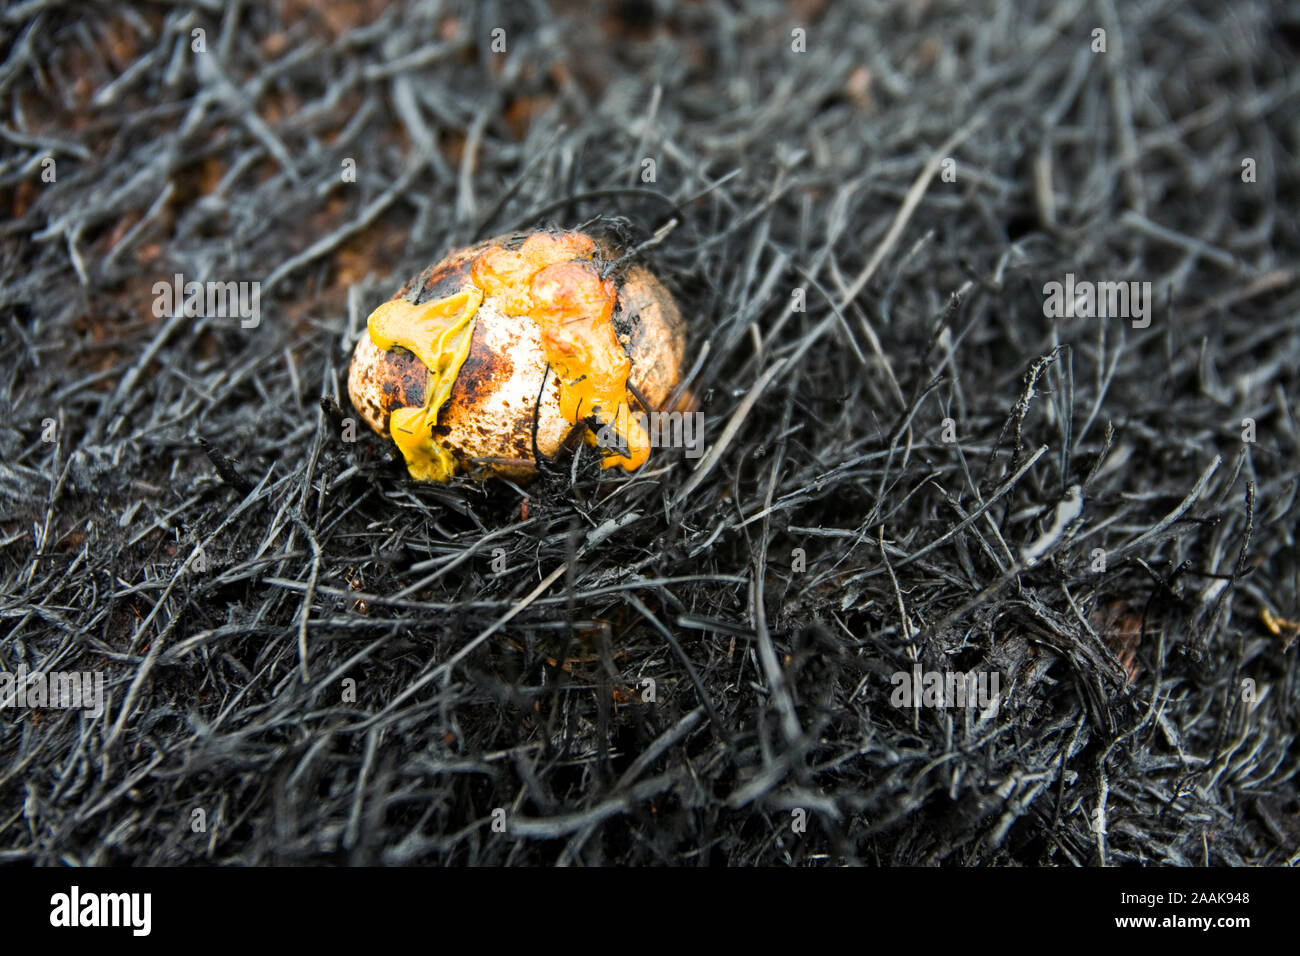 A moorland birds egg fried by fire. An unusually dry spring led to tinder dry conditions on moorland near Littleborough above Manchester UK. A discard Stock Photo